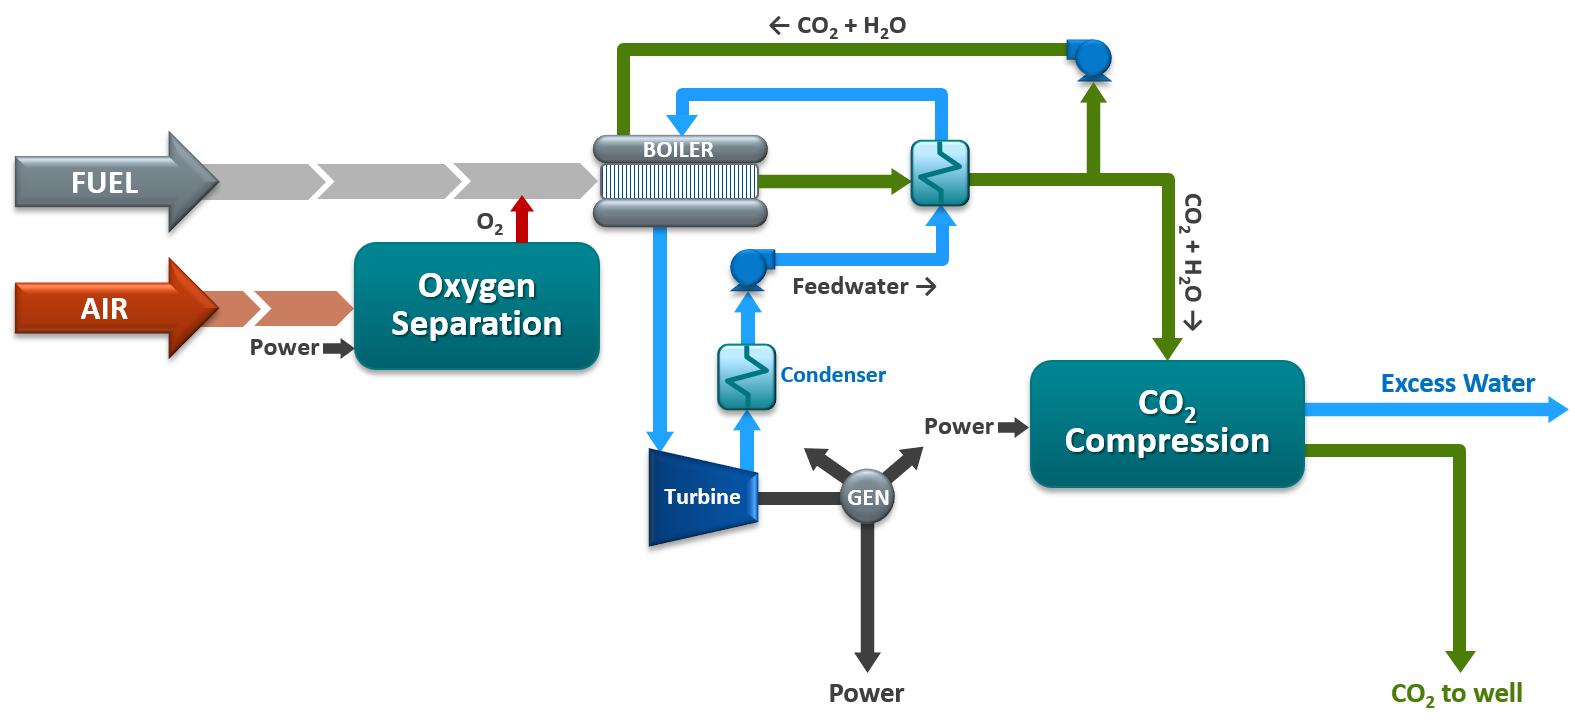 Bioenergy with Carbon Capture and Sequestration - OxyBright Diagram